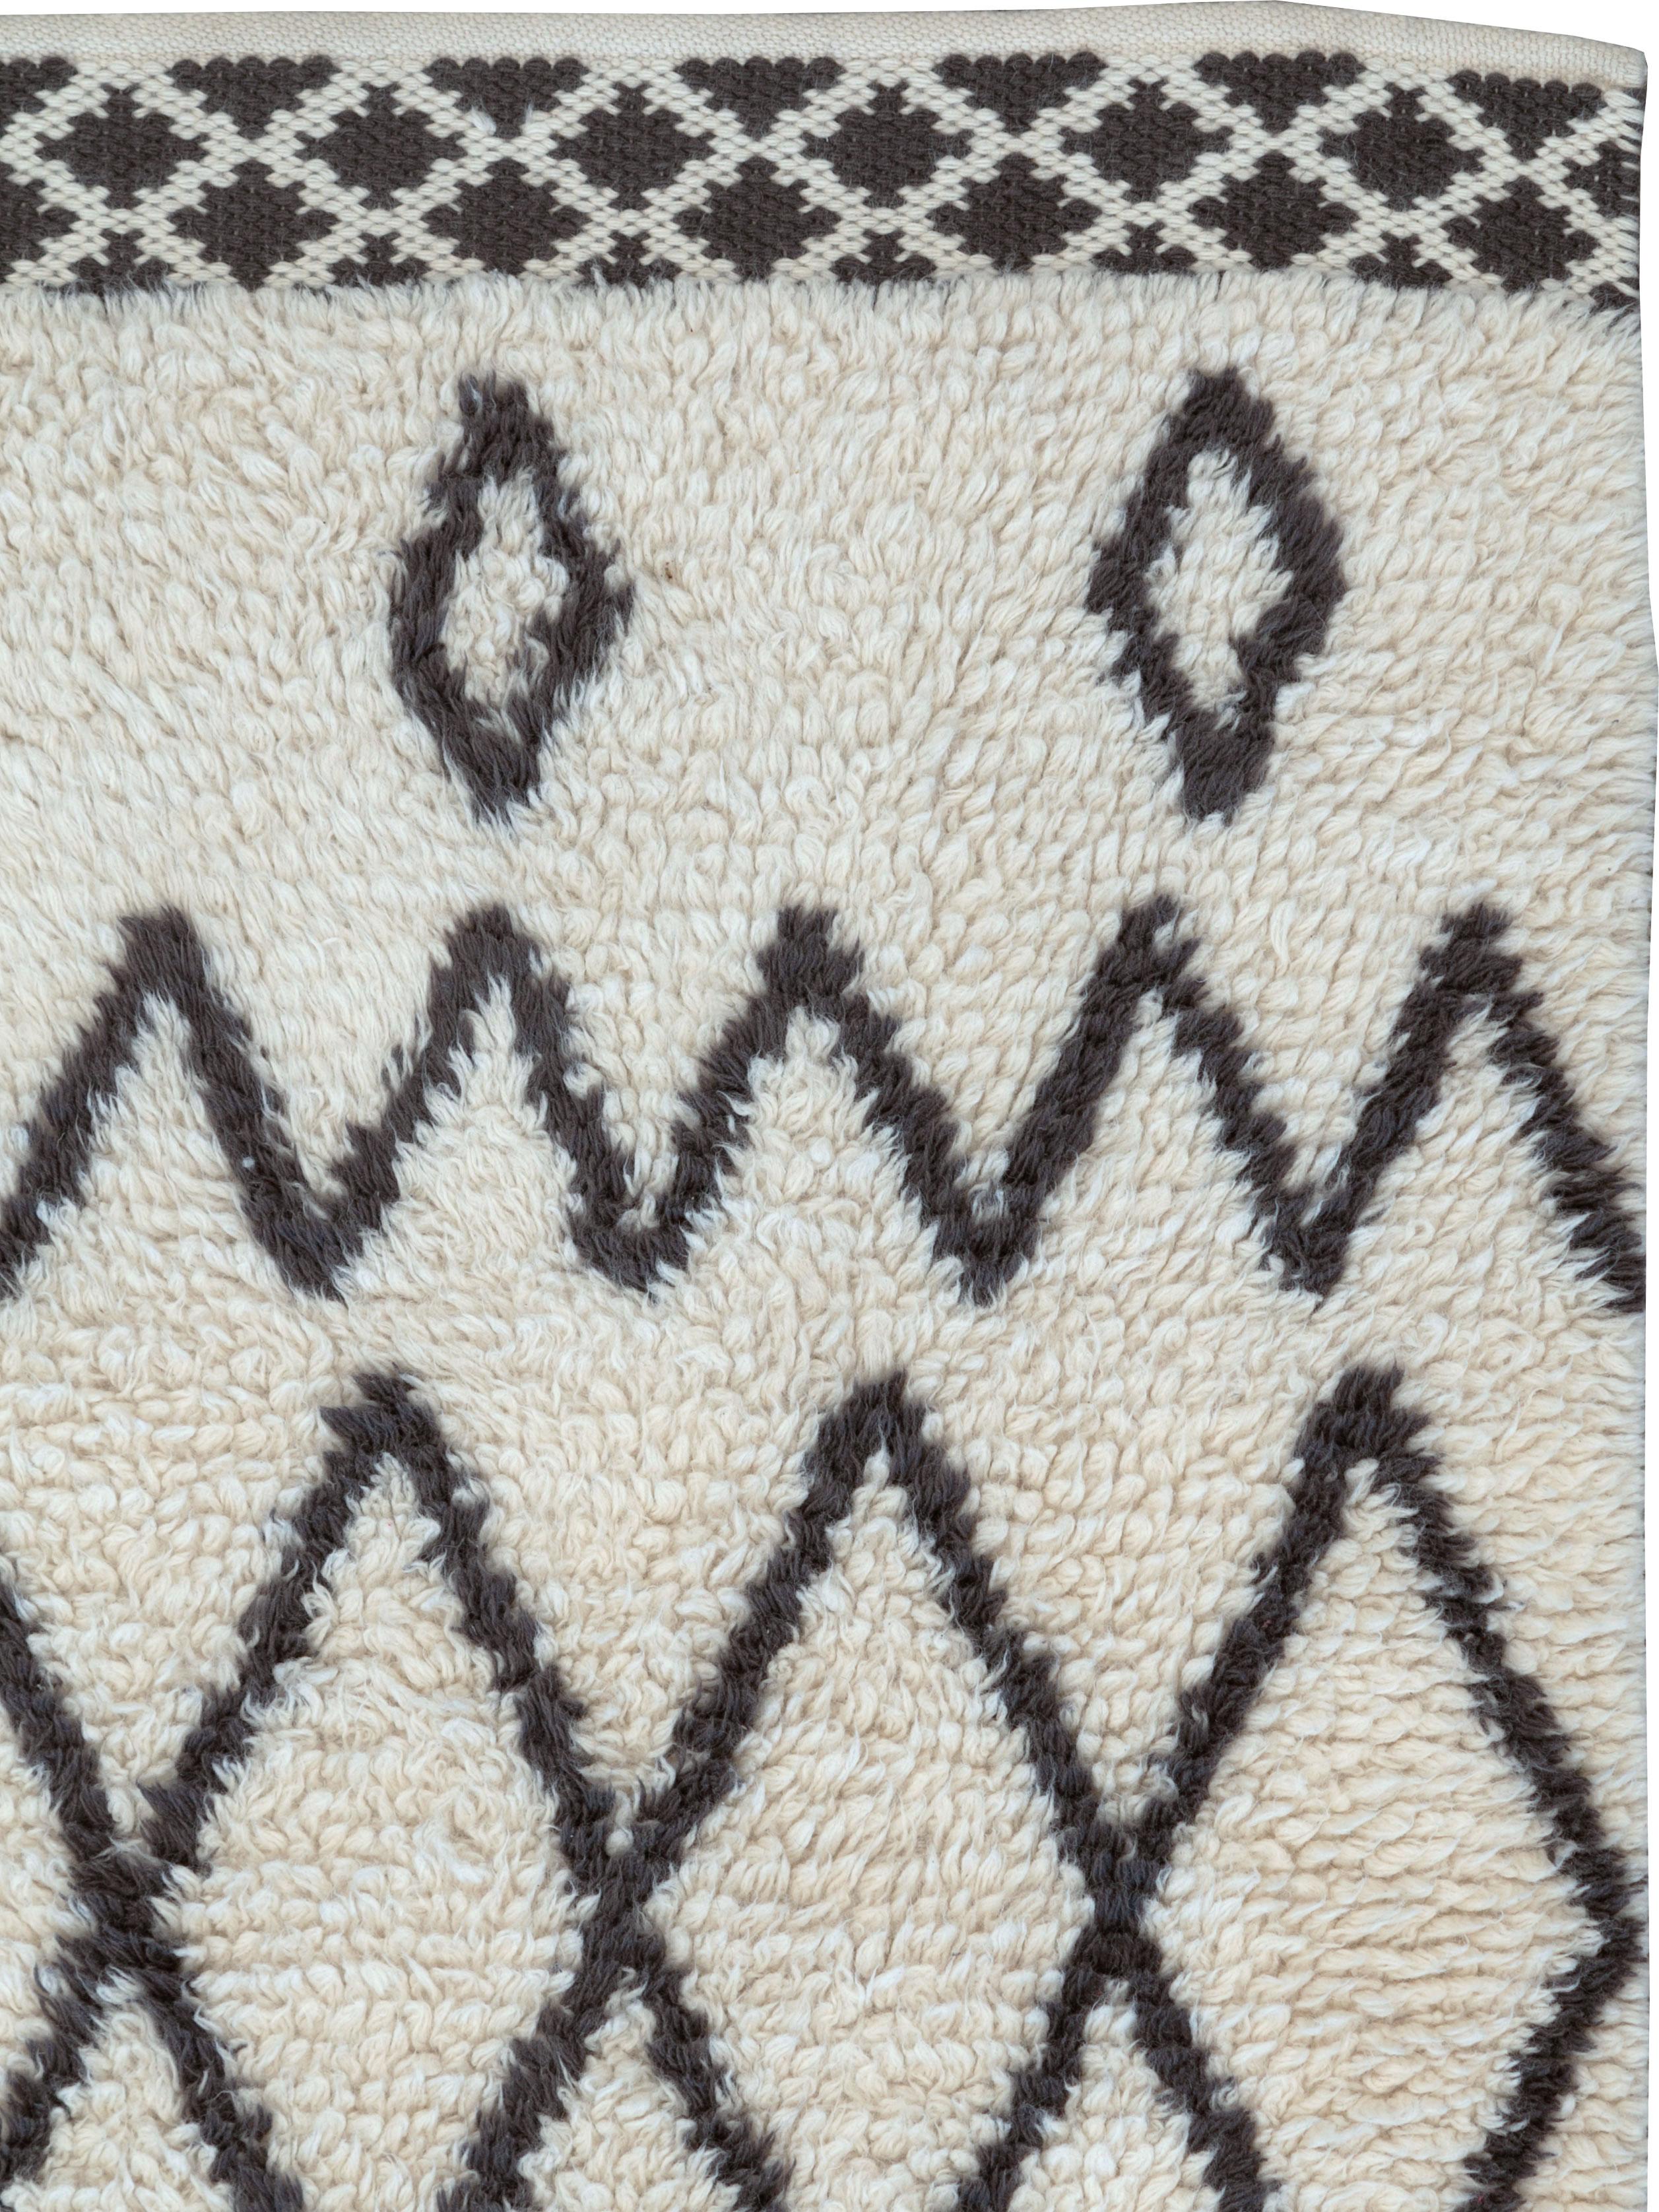 A modernist Moroccan throw rug in the style made famously by the Beni Ourain nomadic tribe from the Atlas Mountains.